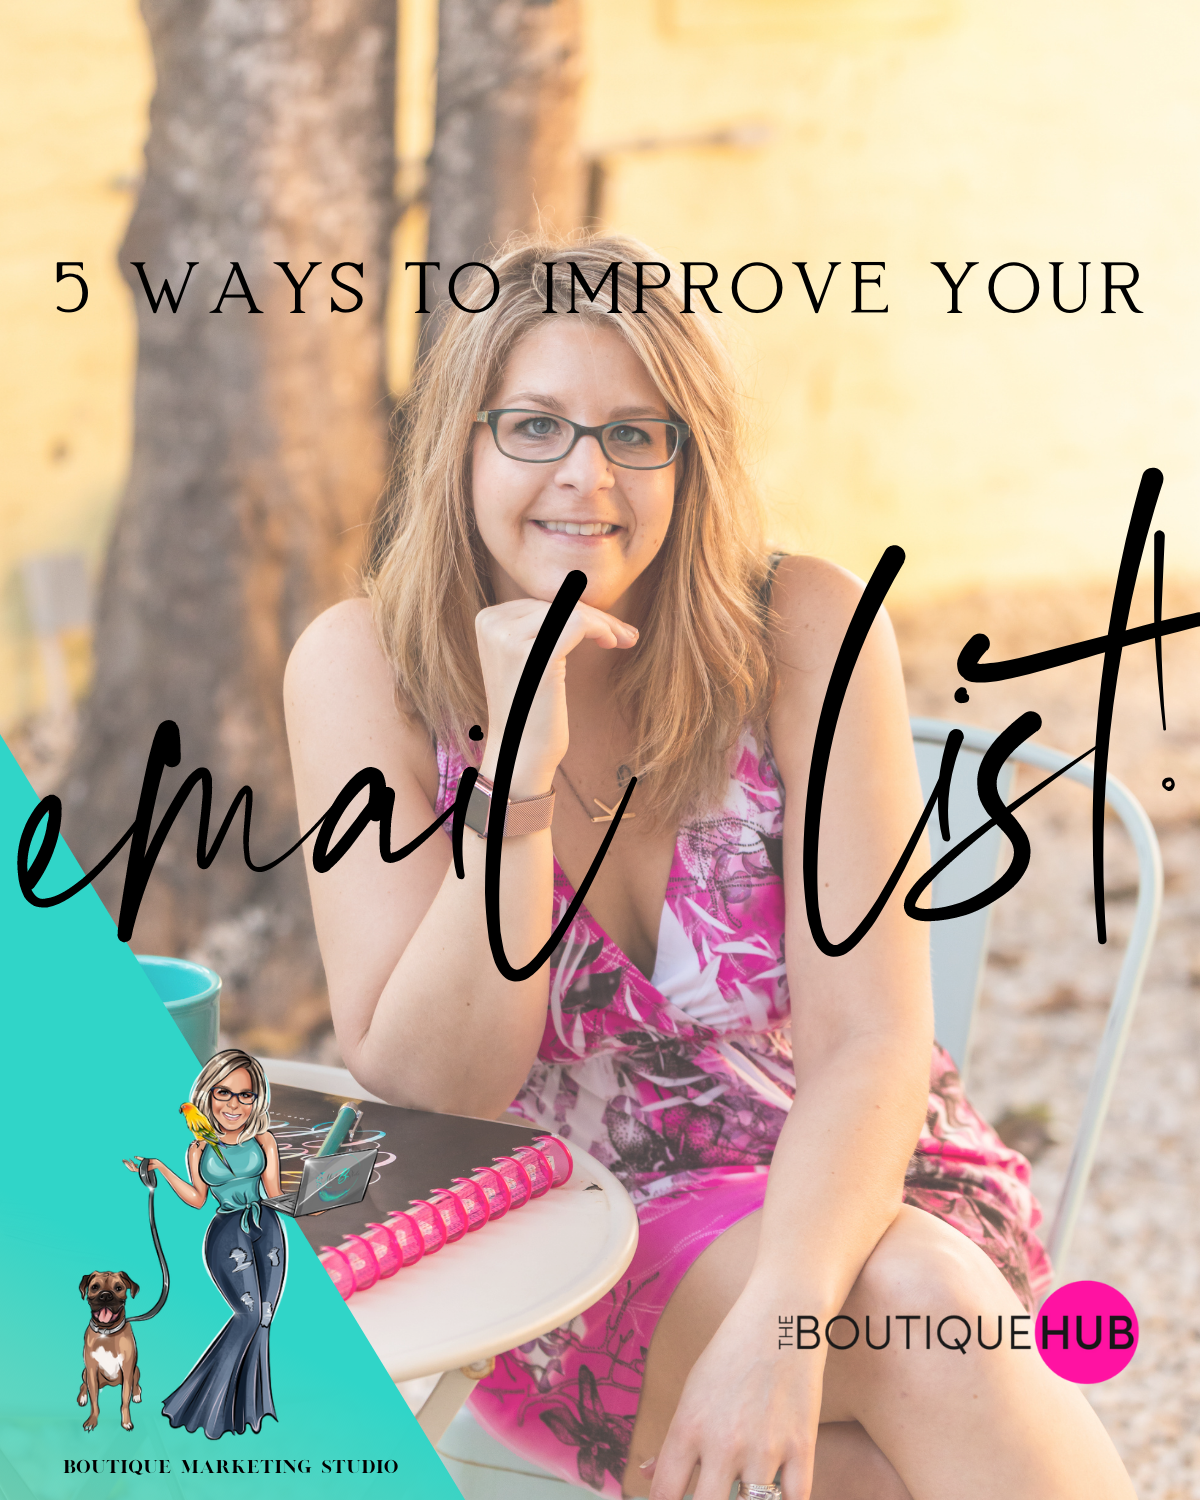 5 ways to improve your email list!